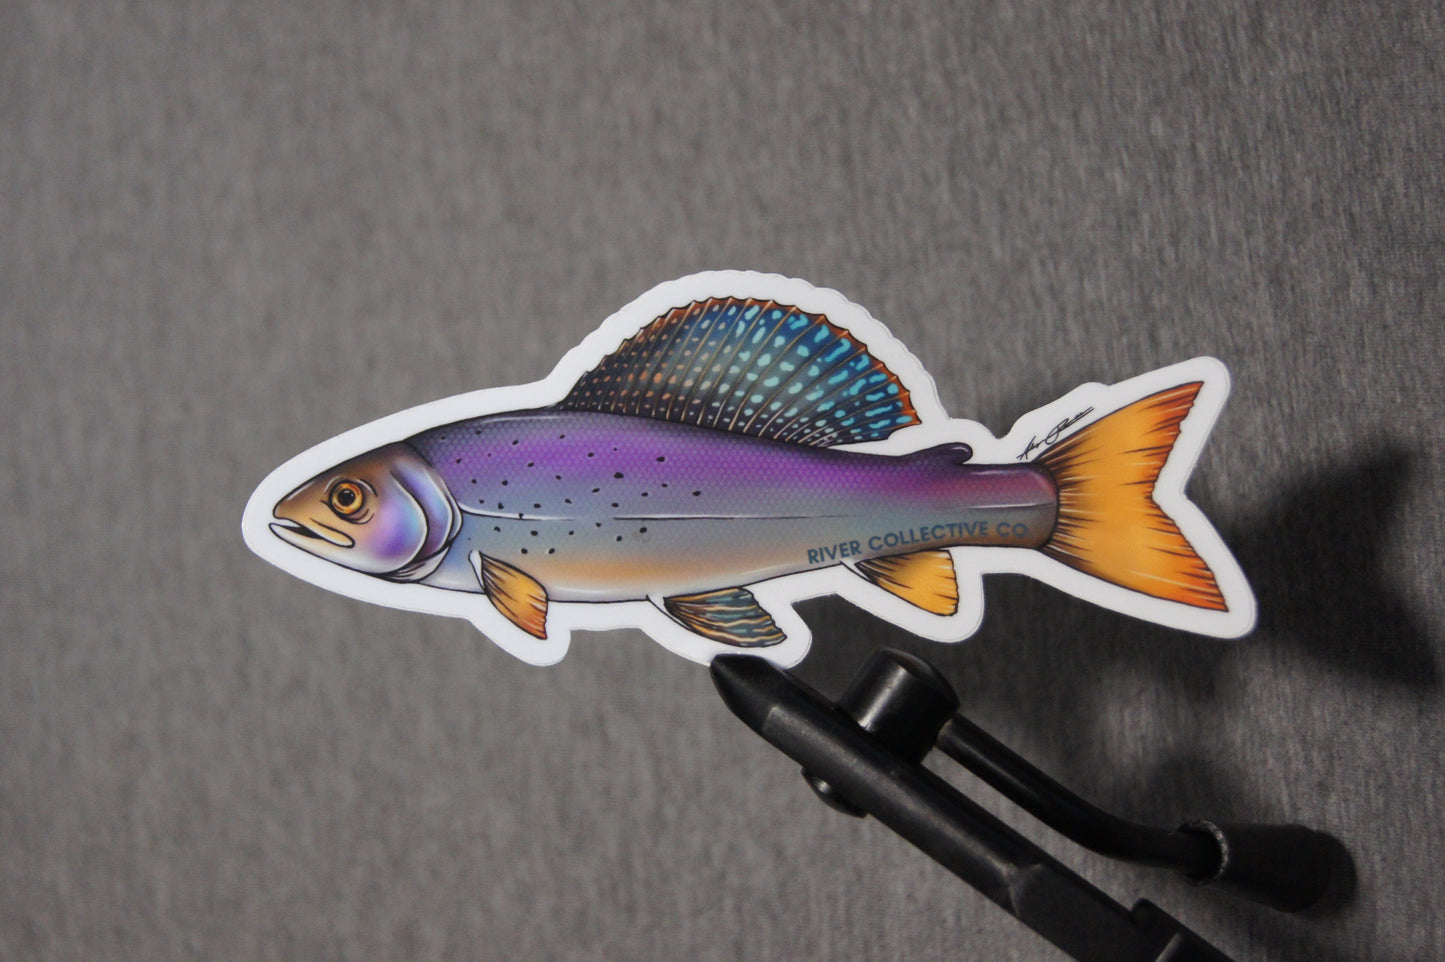 GRAYLING TROUT DECAL